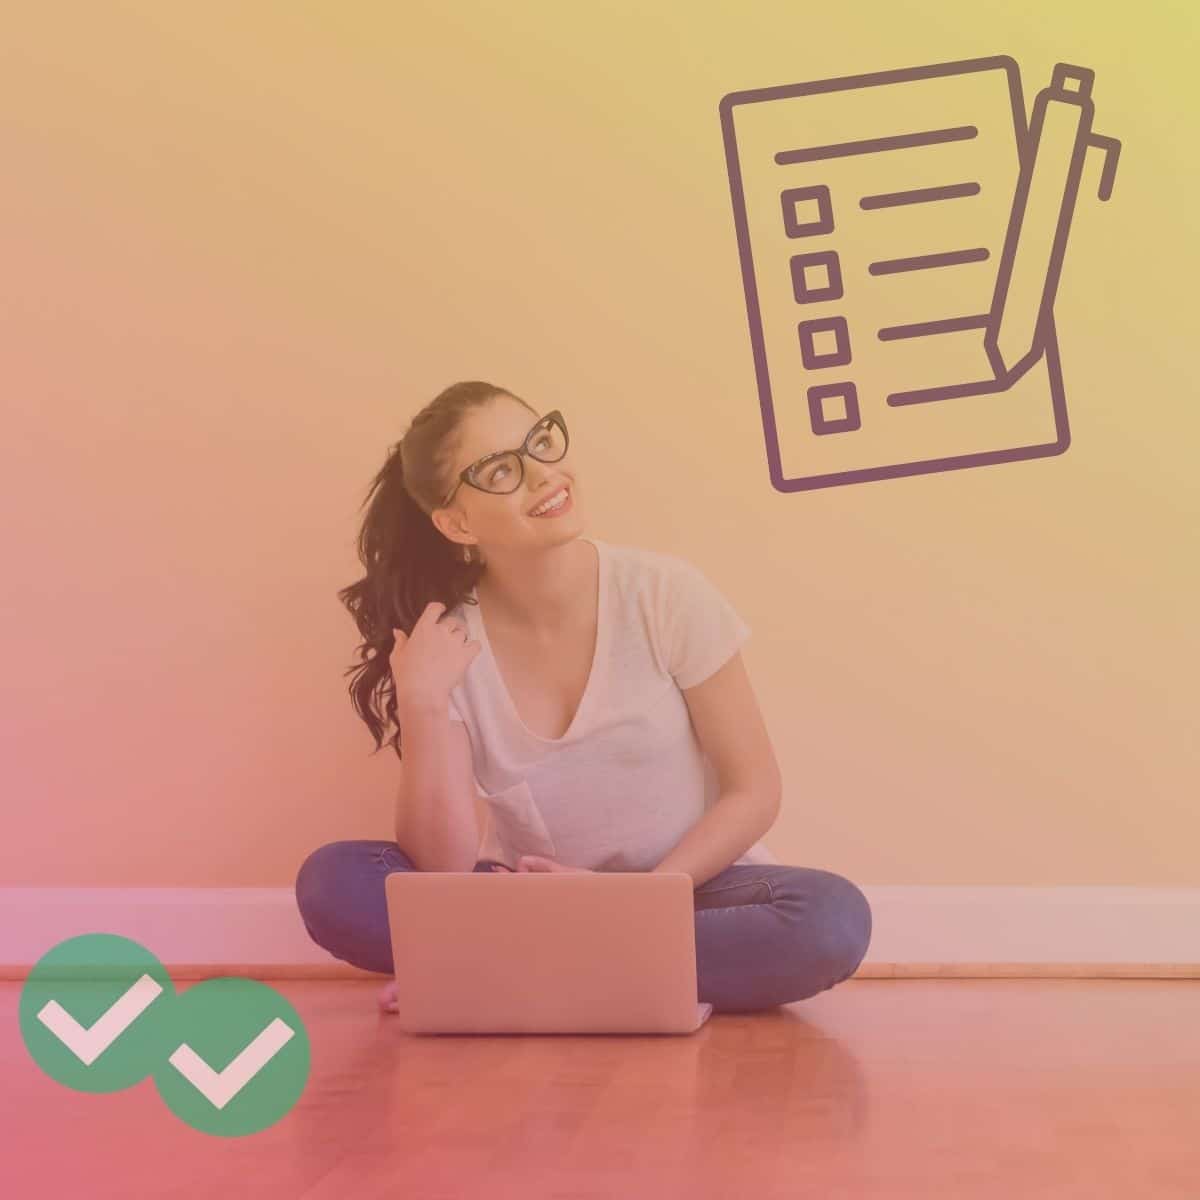 Woman sitting on floor with laptop looks to thepurple checklist and pencil above her representing LSAT Prep Checklist - image by Magoosh